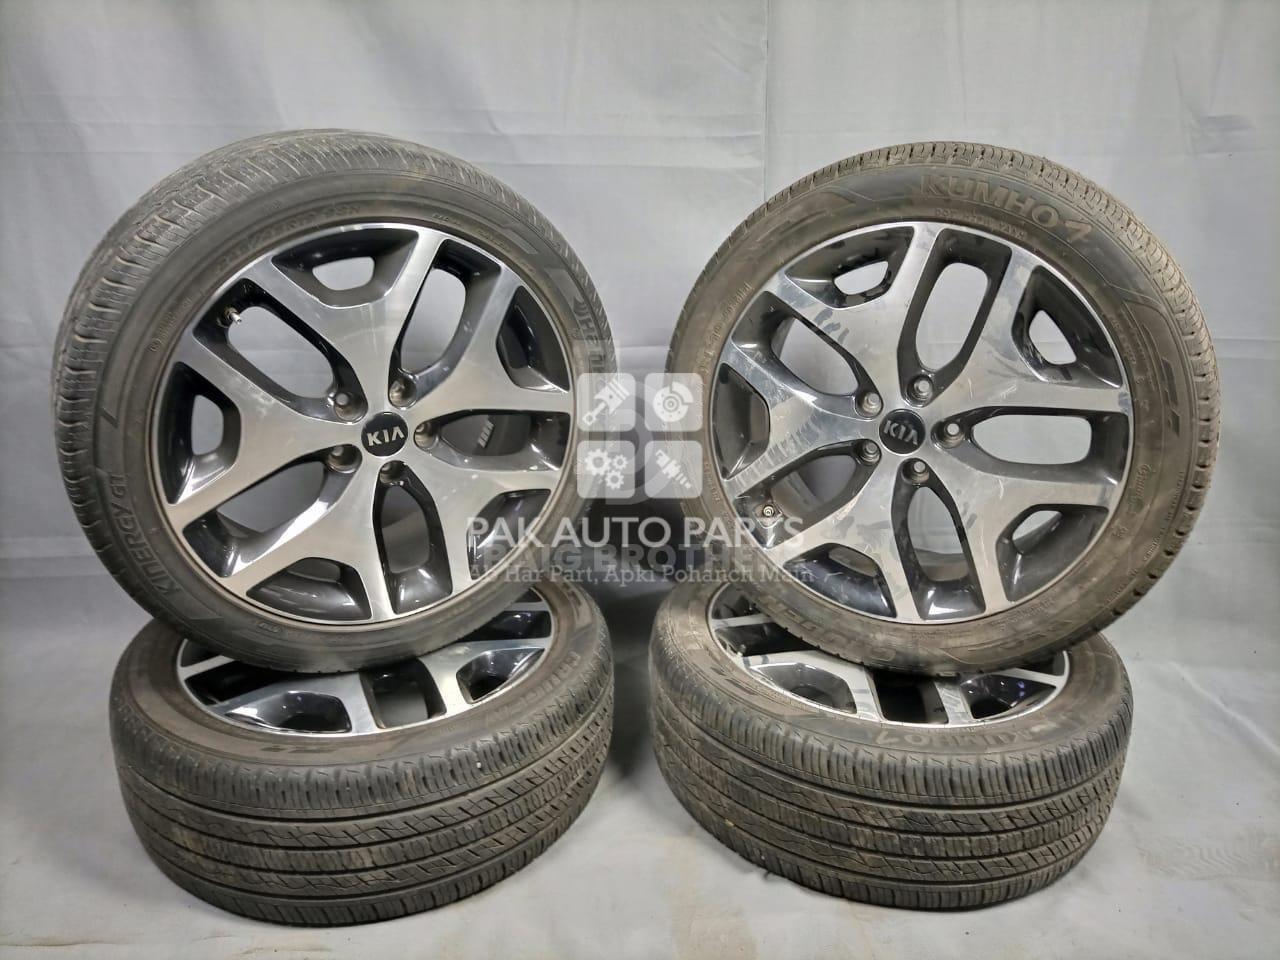 Picture of Kia Sportage GT-Line 19" Alloy Rim Set With Tyres